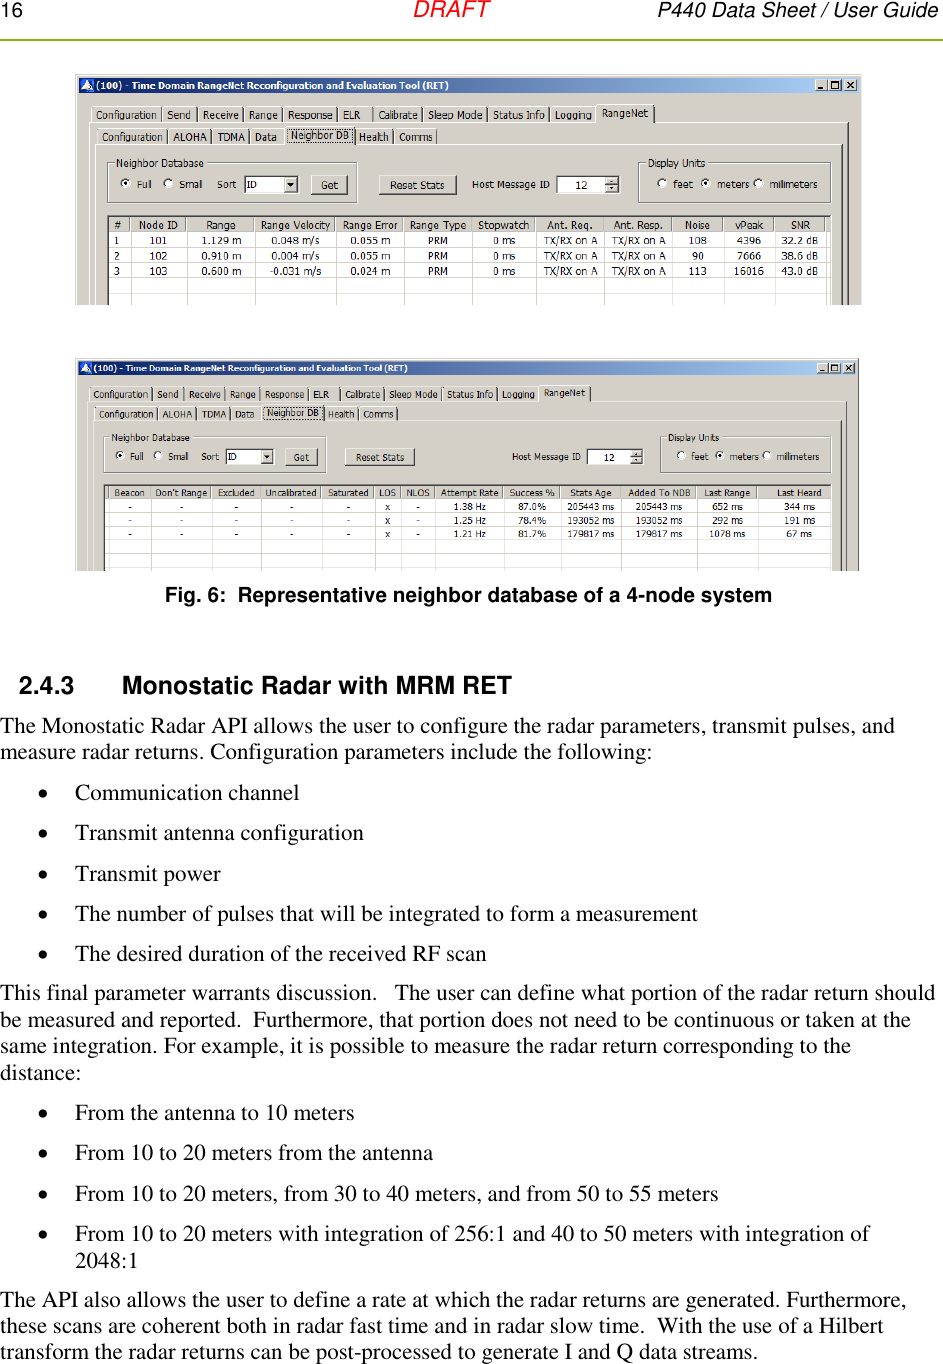 16   DRAFT P440 Data Sheet / User Guide   Fig. 6:  Representative neighbor database of a 4-node system  2.4.3      Monostatic Radar with MRM RET The Monostatic Radar API allows the user to configure the radar parameters, transmit pulses, and measure radar returns. Configuration parameters include the following:  Communication channel  Transmit antenna configuration  Transmit power  The number of pulses that will be integrated to form a measurement  The desired duration of the received RF scan    This final parameter warrants discussion.   The user can define what portion of the radar return should be measured and reported.  Furthermore, that portion does not need to be continuous or taken at the same integration. For example, it is possible to measure the radar return corresponding to the distance:  From the antenna to 10 meters  From 10 to 20 meters from the antenna  From 10 to 20 meters, from 30 to 40 meters, and from 50 to 55 meters  From 10 to 20 meters with integration of 256:1 and 40 to 50 meters with integration of 2048:1  The API also allows the user to define a rate at which the radar returns are generated. Furthermore, these scans are coherent both in radar fast time and in radar slow time.  With the use of a Hilbert transform the radar returns can be post-processed to generate I and Q data streams.  